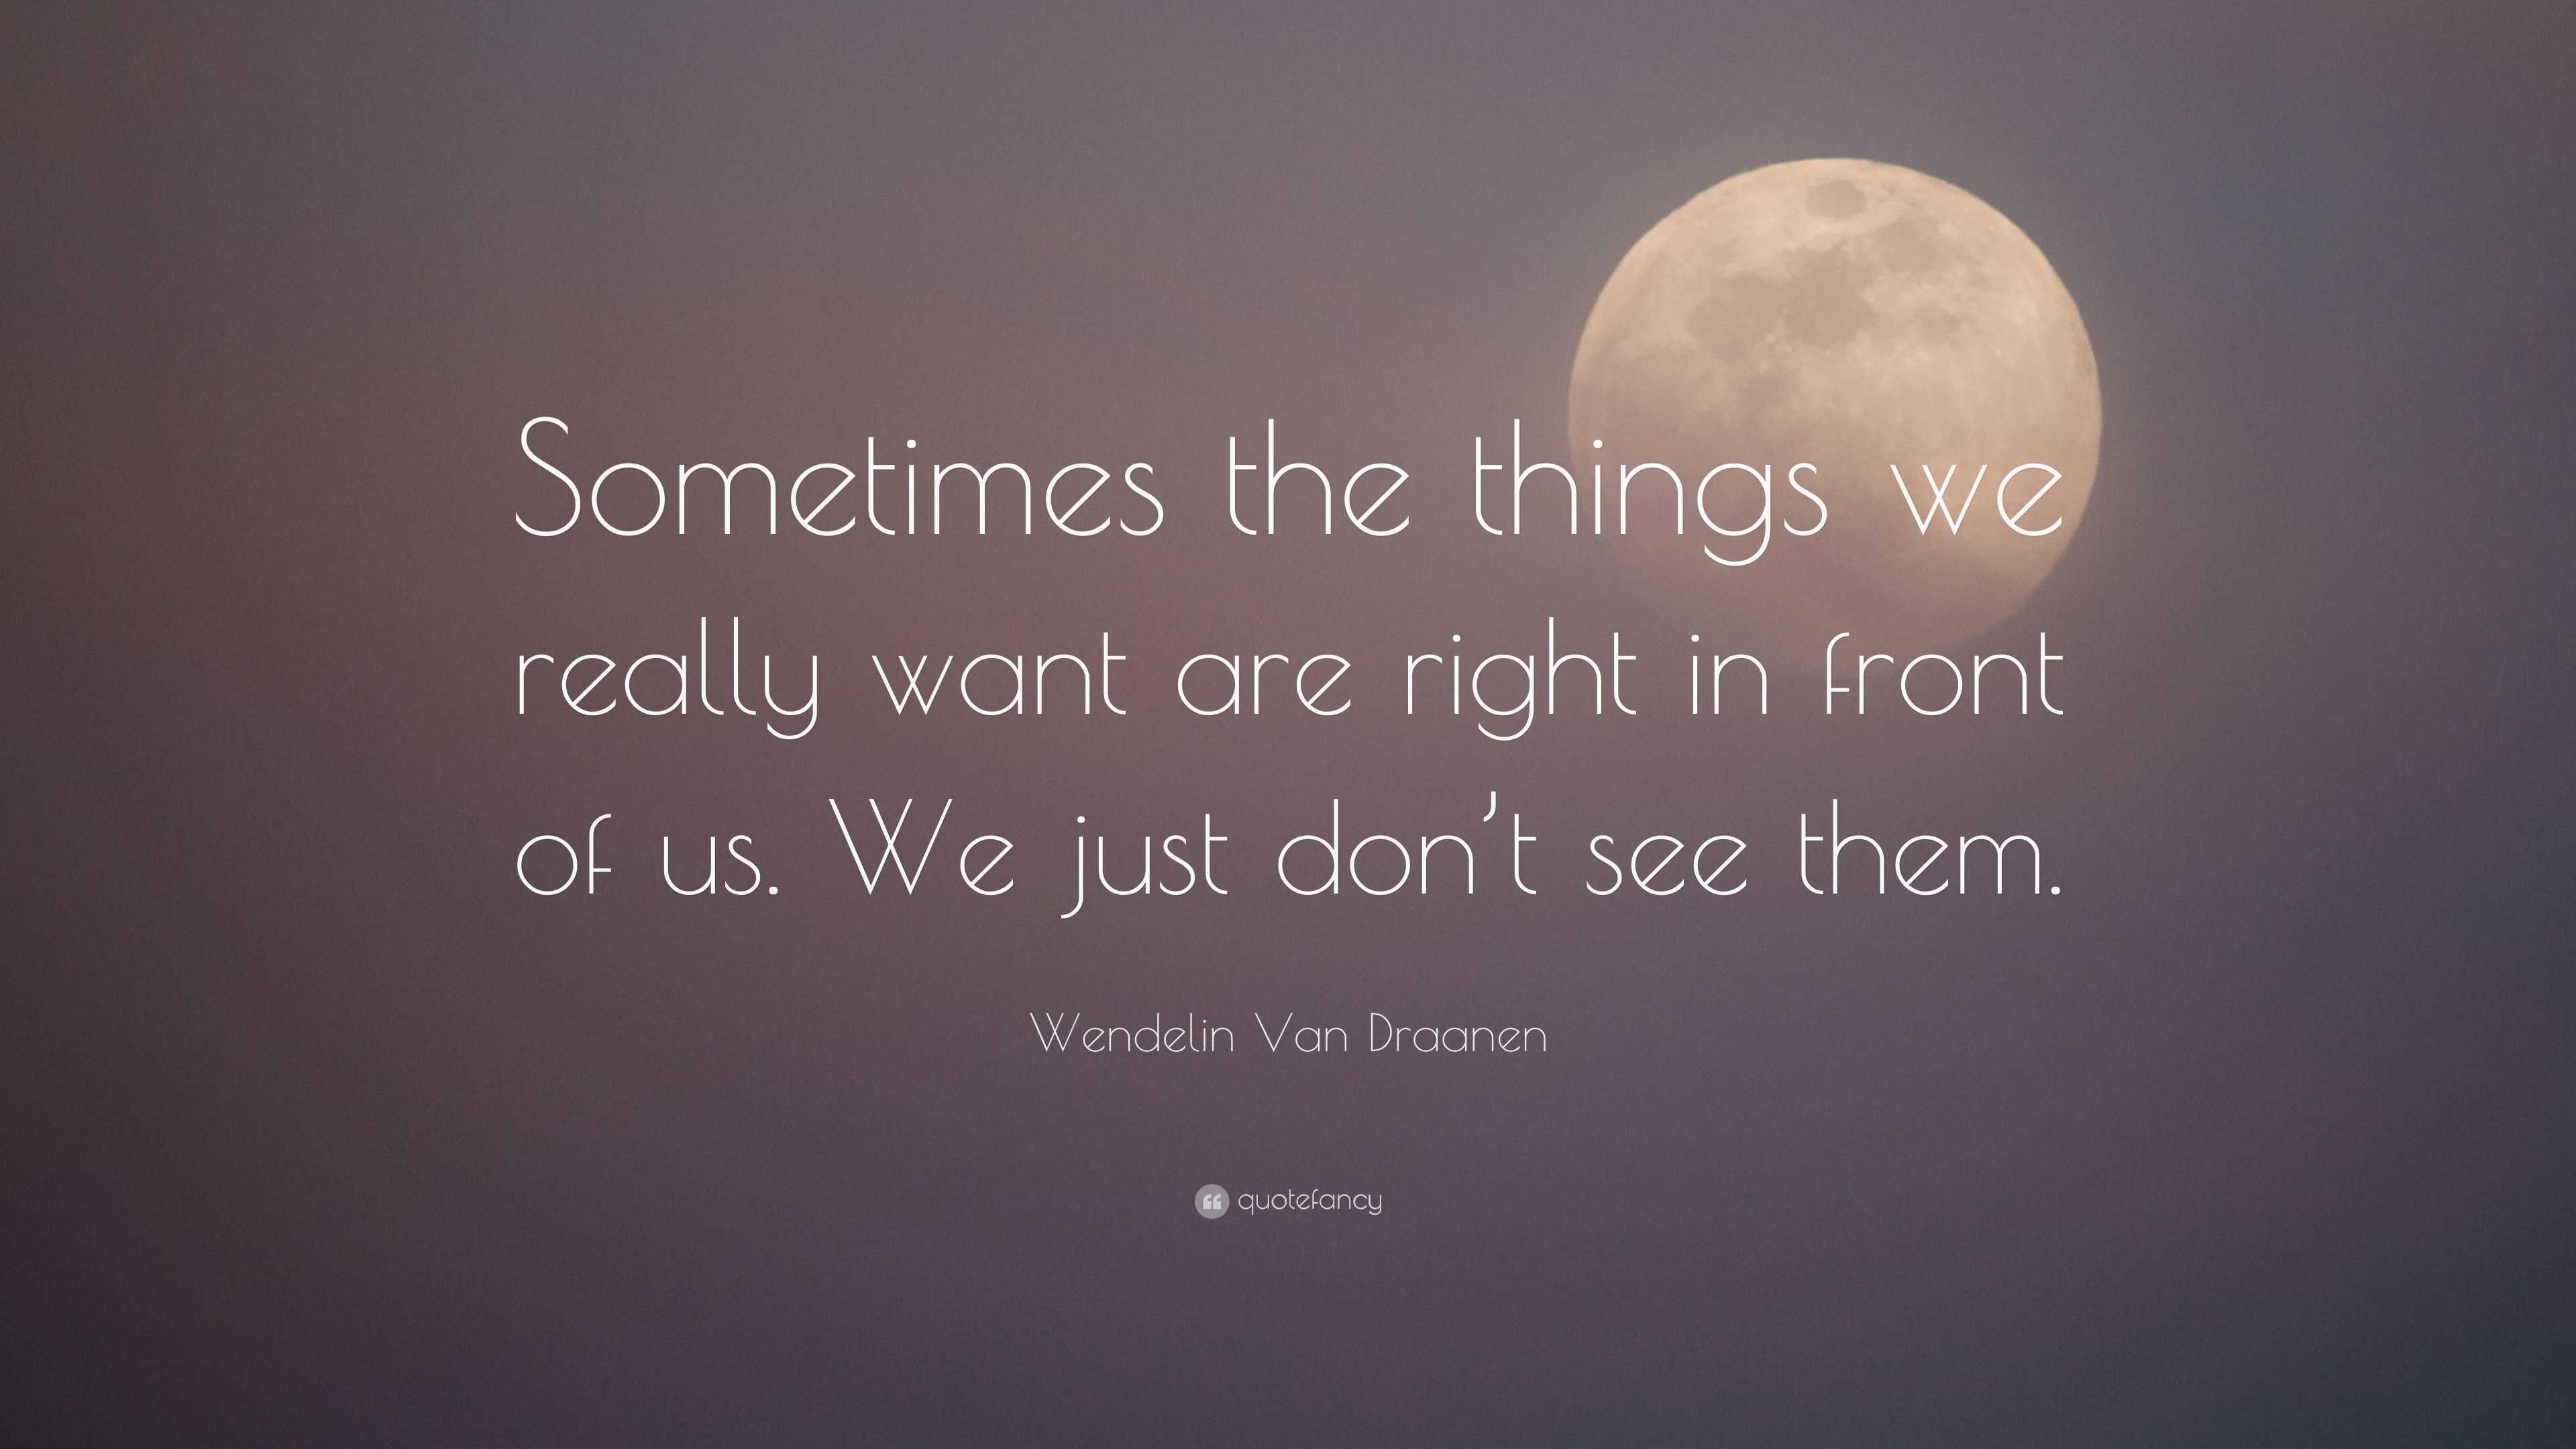 Wendelin Van Draanen Quote: “Sometimes the things we really want are ...